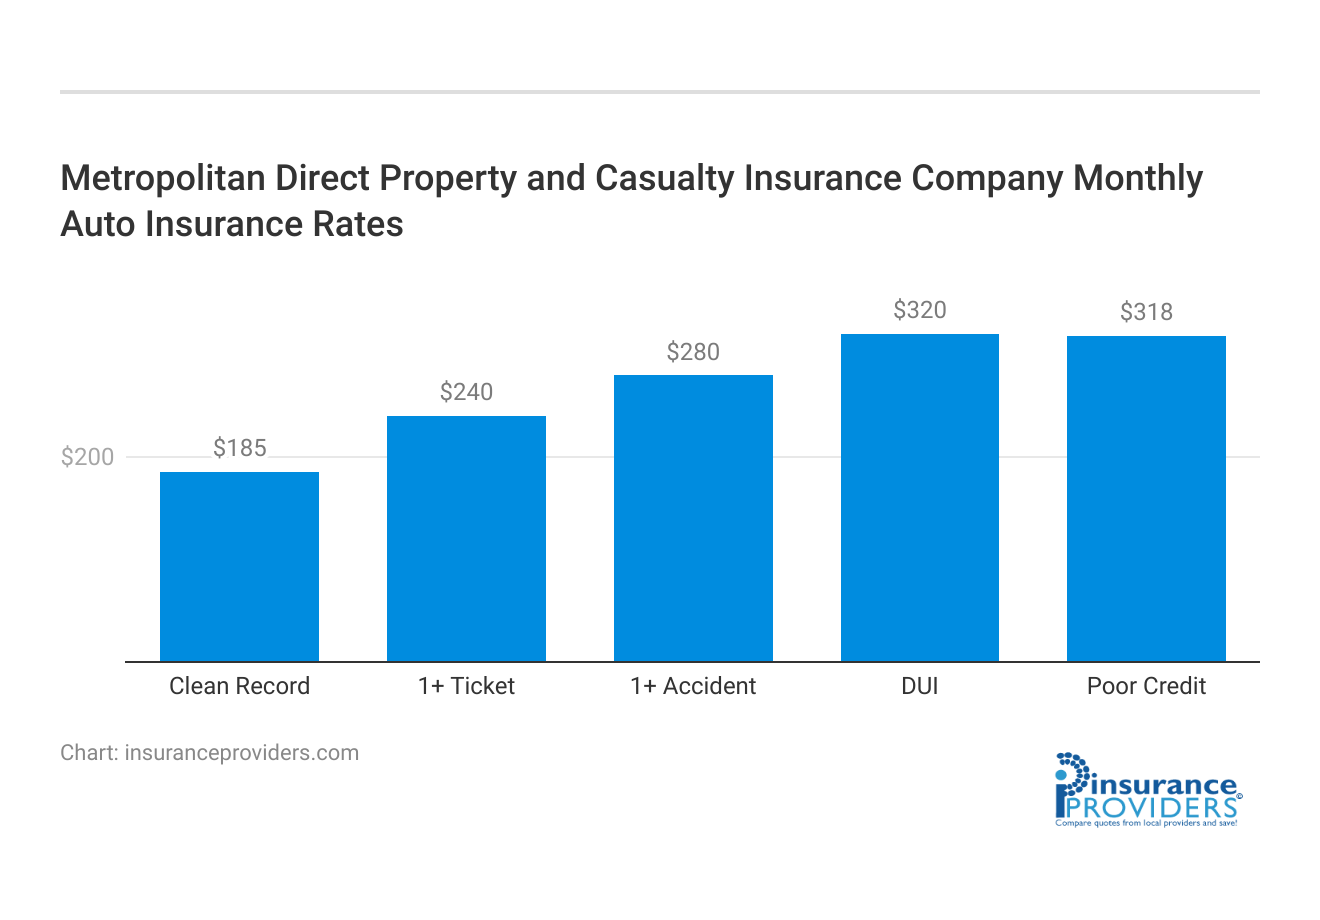 <h3>Metropolitan Direct Property and Casualty Insurance Company Monthly Auto Insurance Rates</h3>